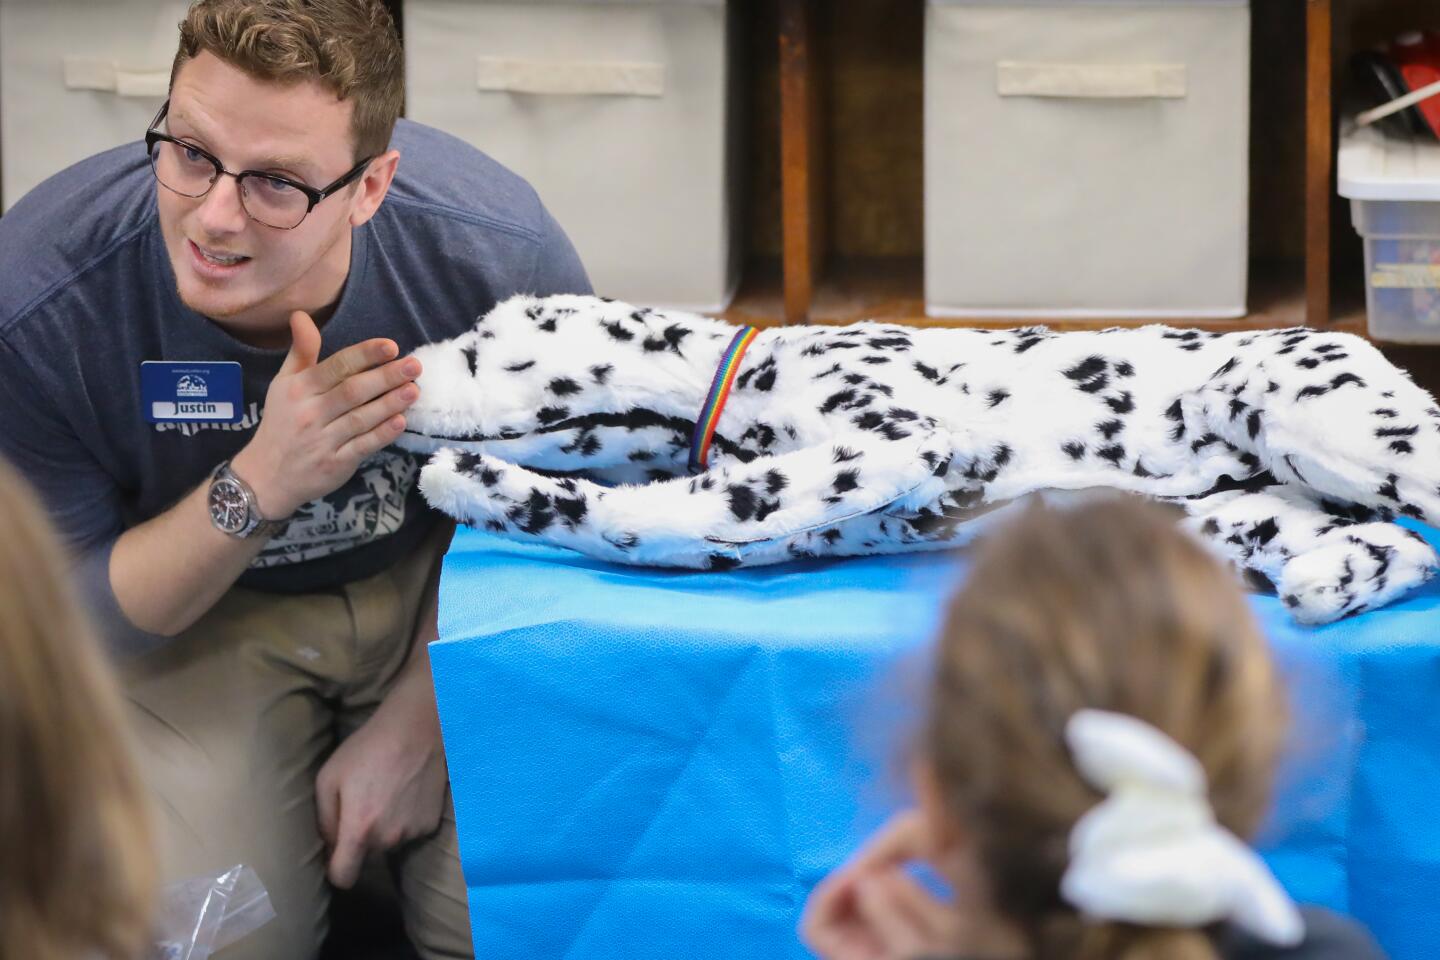 Justin Norris, education coordinator at the Helen Woodward Animal Center, discusses the process of canine CPR, during the one-day veterinarian camp, February 8, in Rancho Santa Fe.